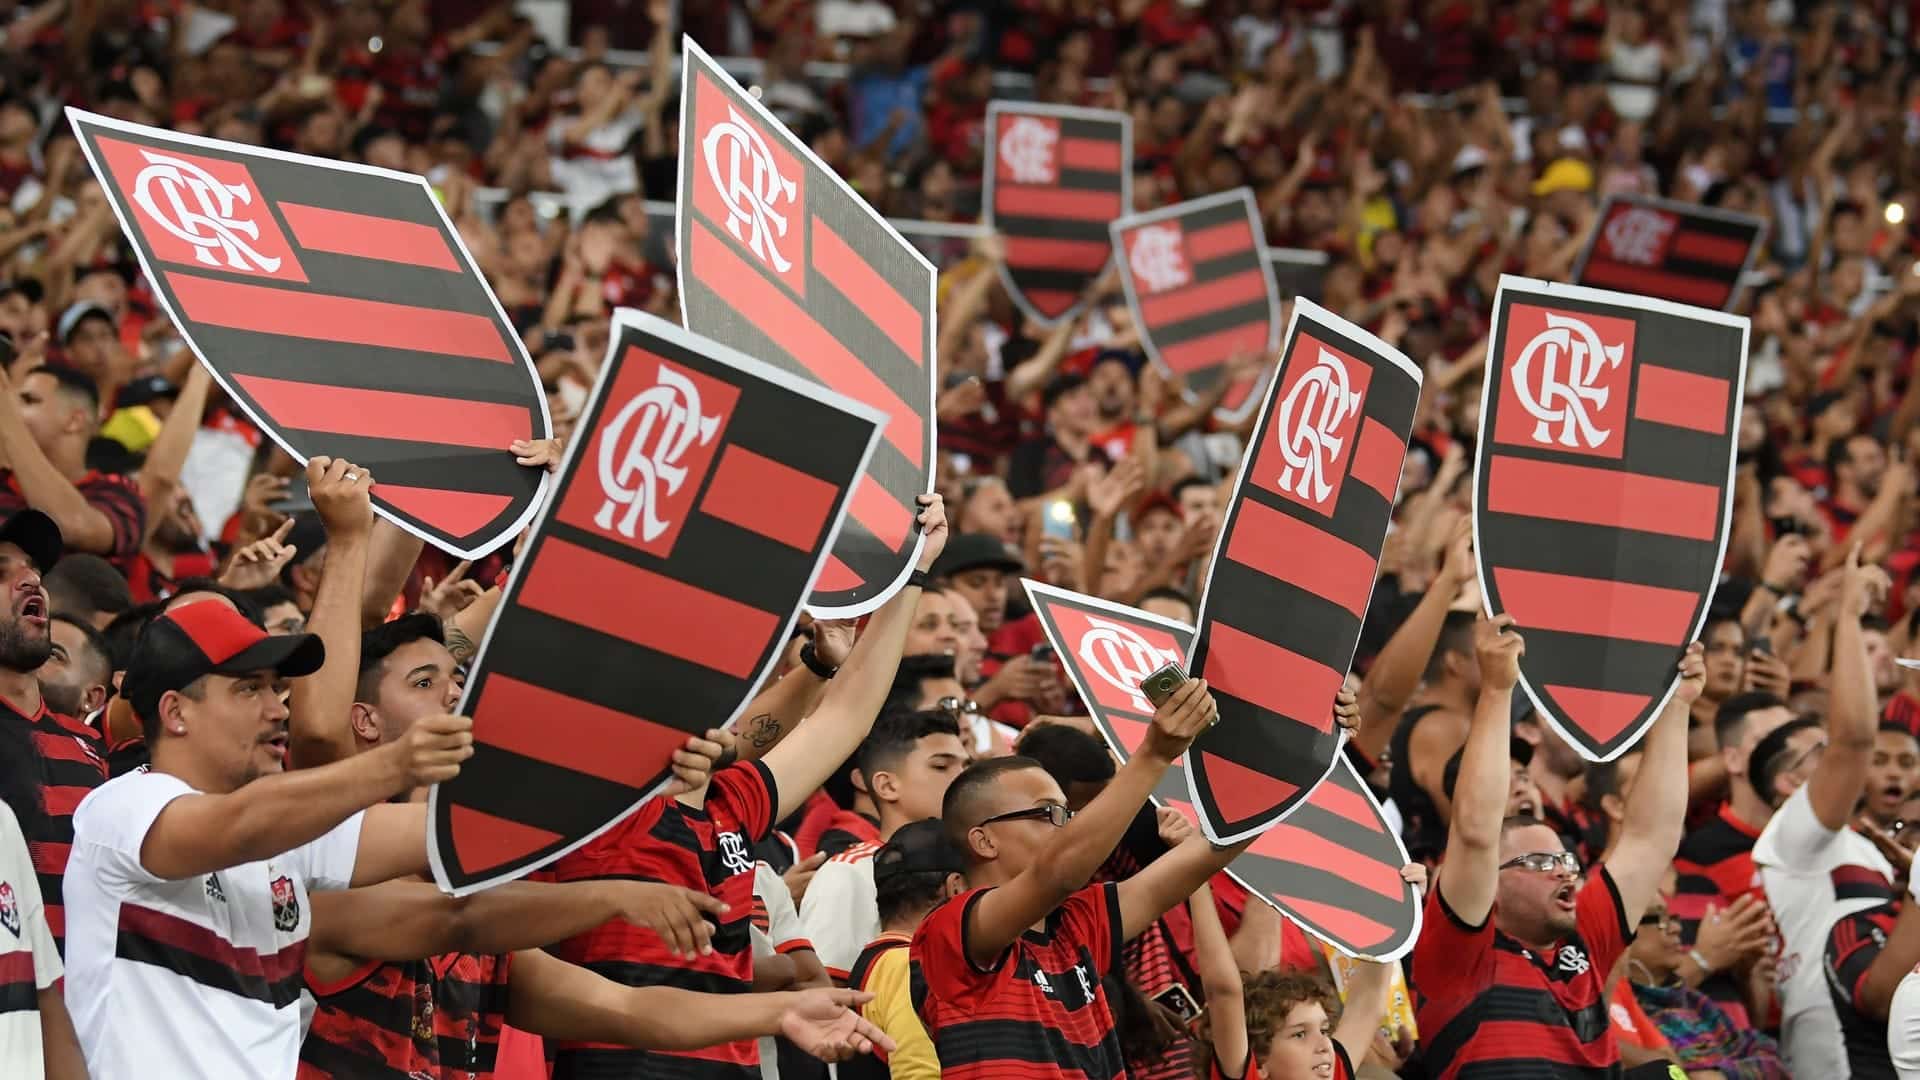 Flamengo promotes special event for Fan Token holders